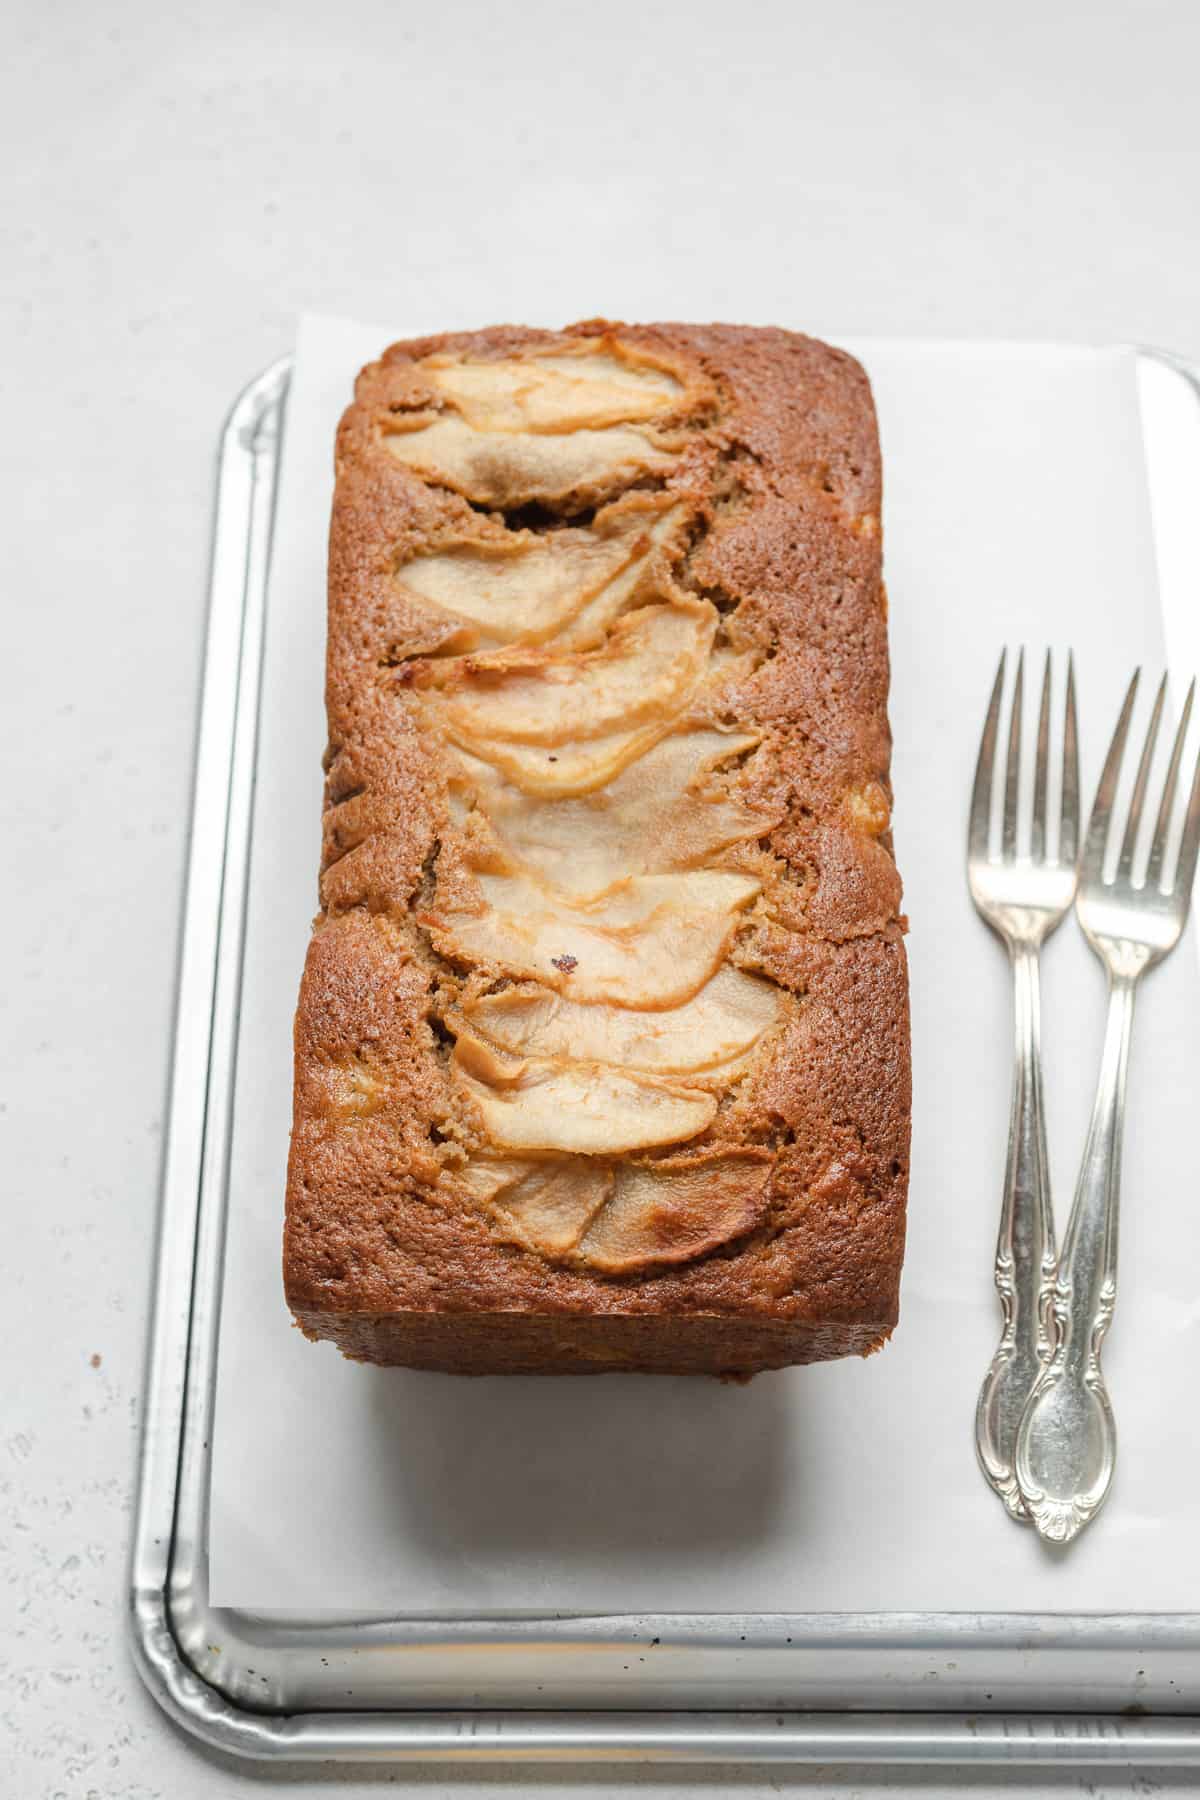 ¾ view of pear bread with sliced pears on top next to 2 forks.